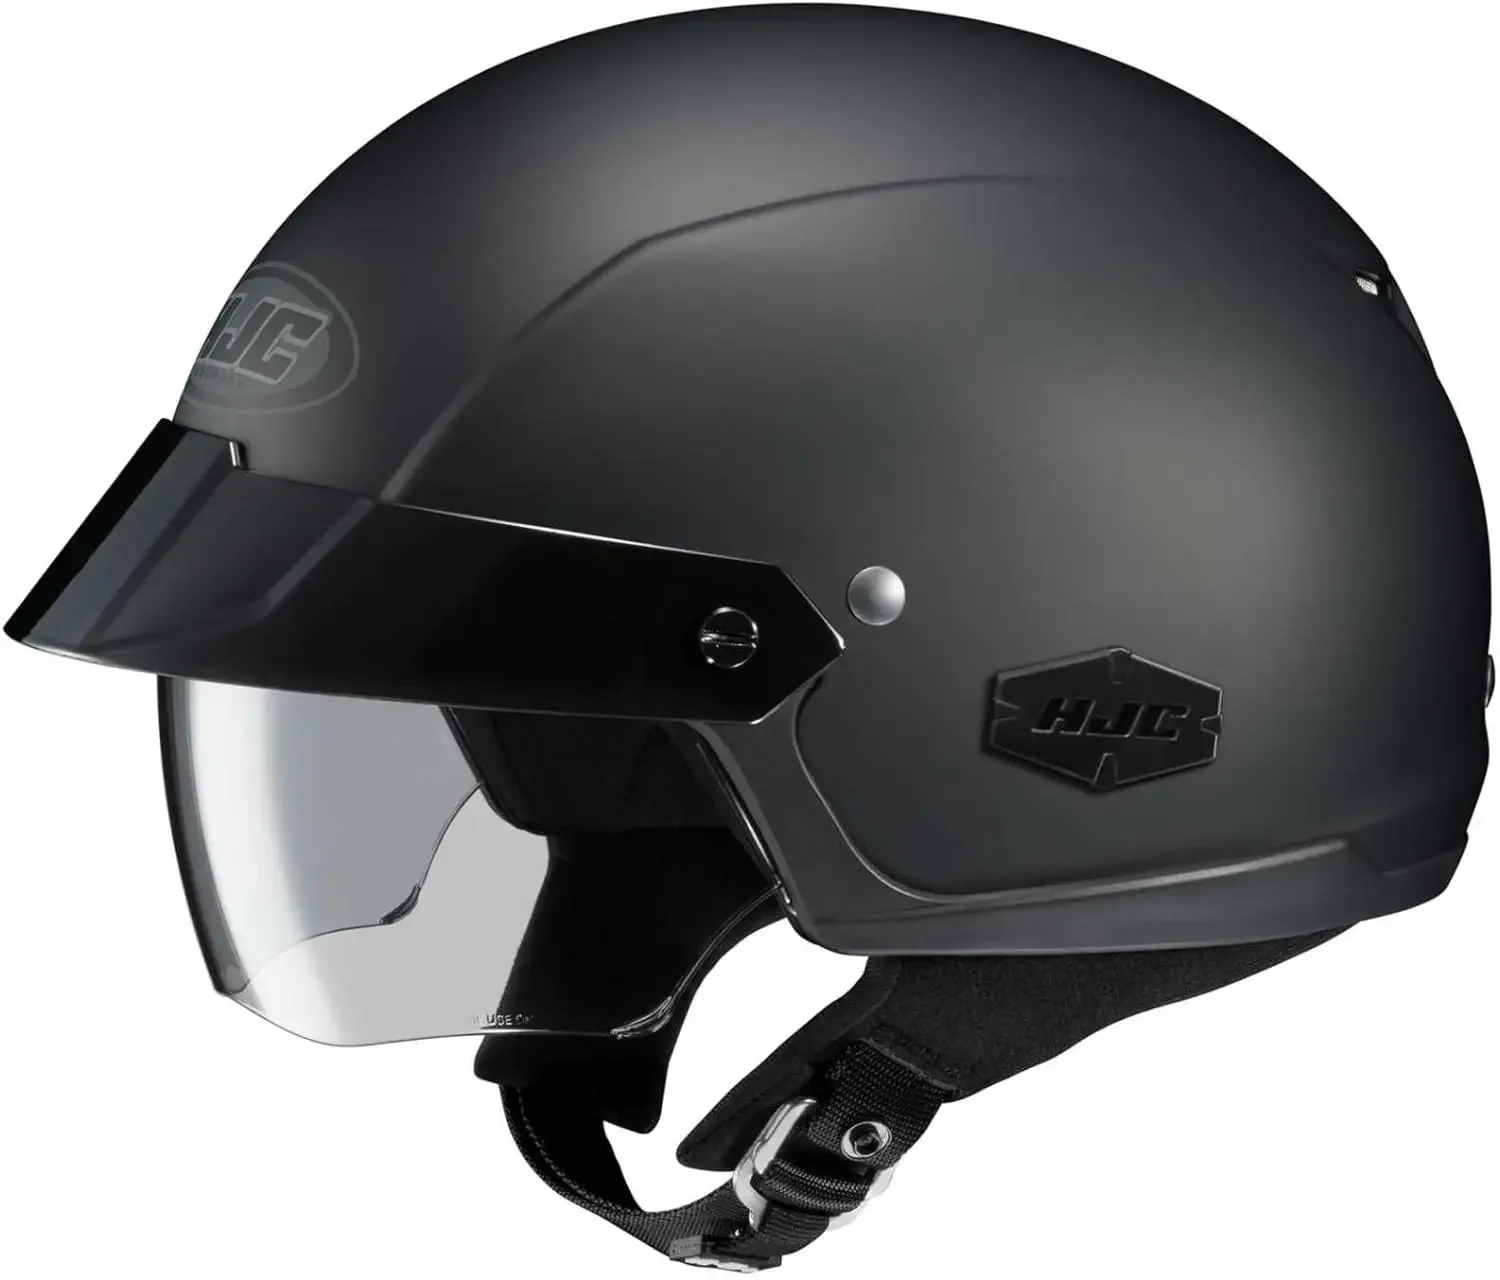 

Black Men's X-Large Cruiser Motorcycle Helmet - Stylish, Comfortable and Safe Riding Gear for Men in Black Color - Extra Large S